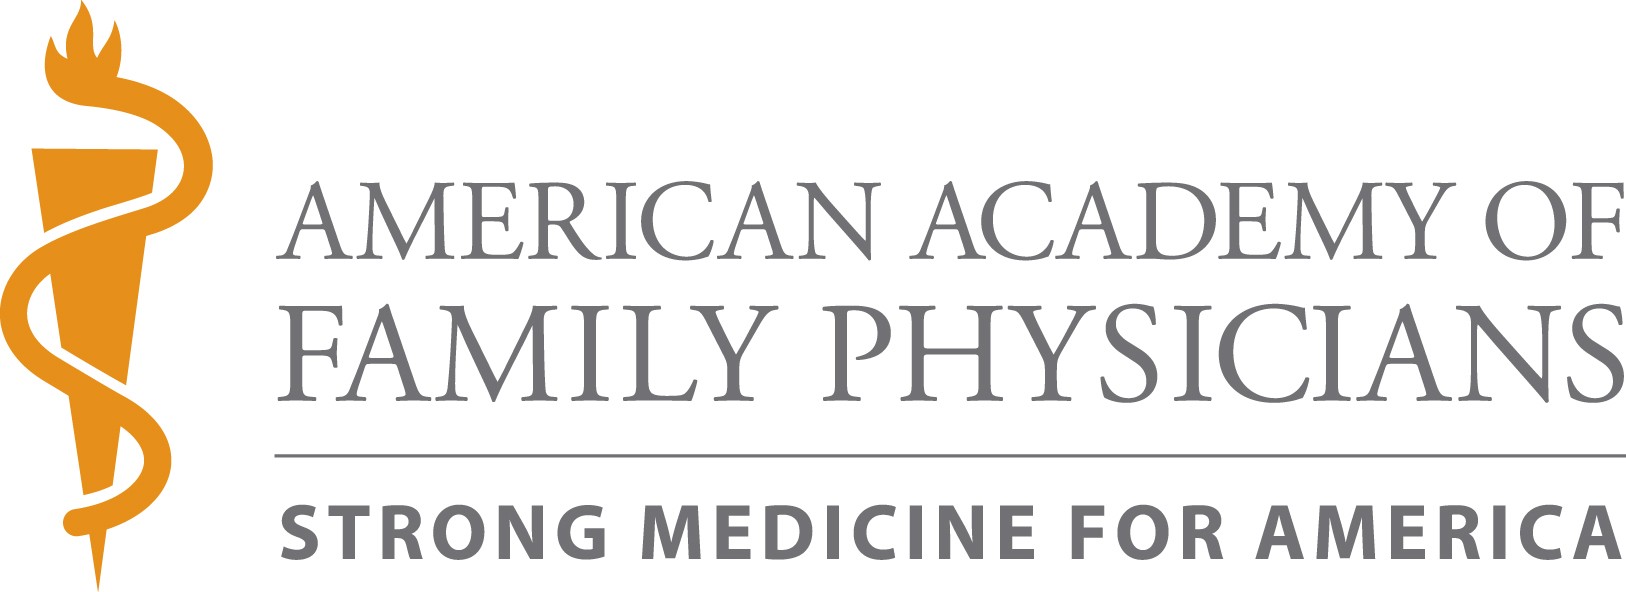 Dr. Clive Fields Named AAFP Physician Executive of the Year